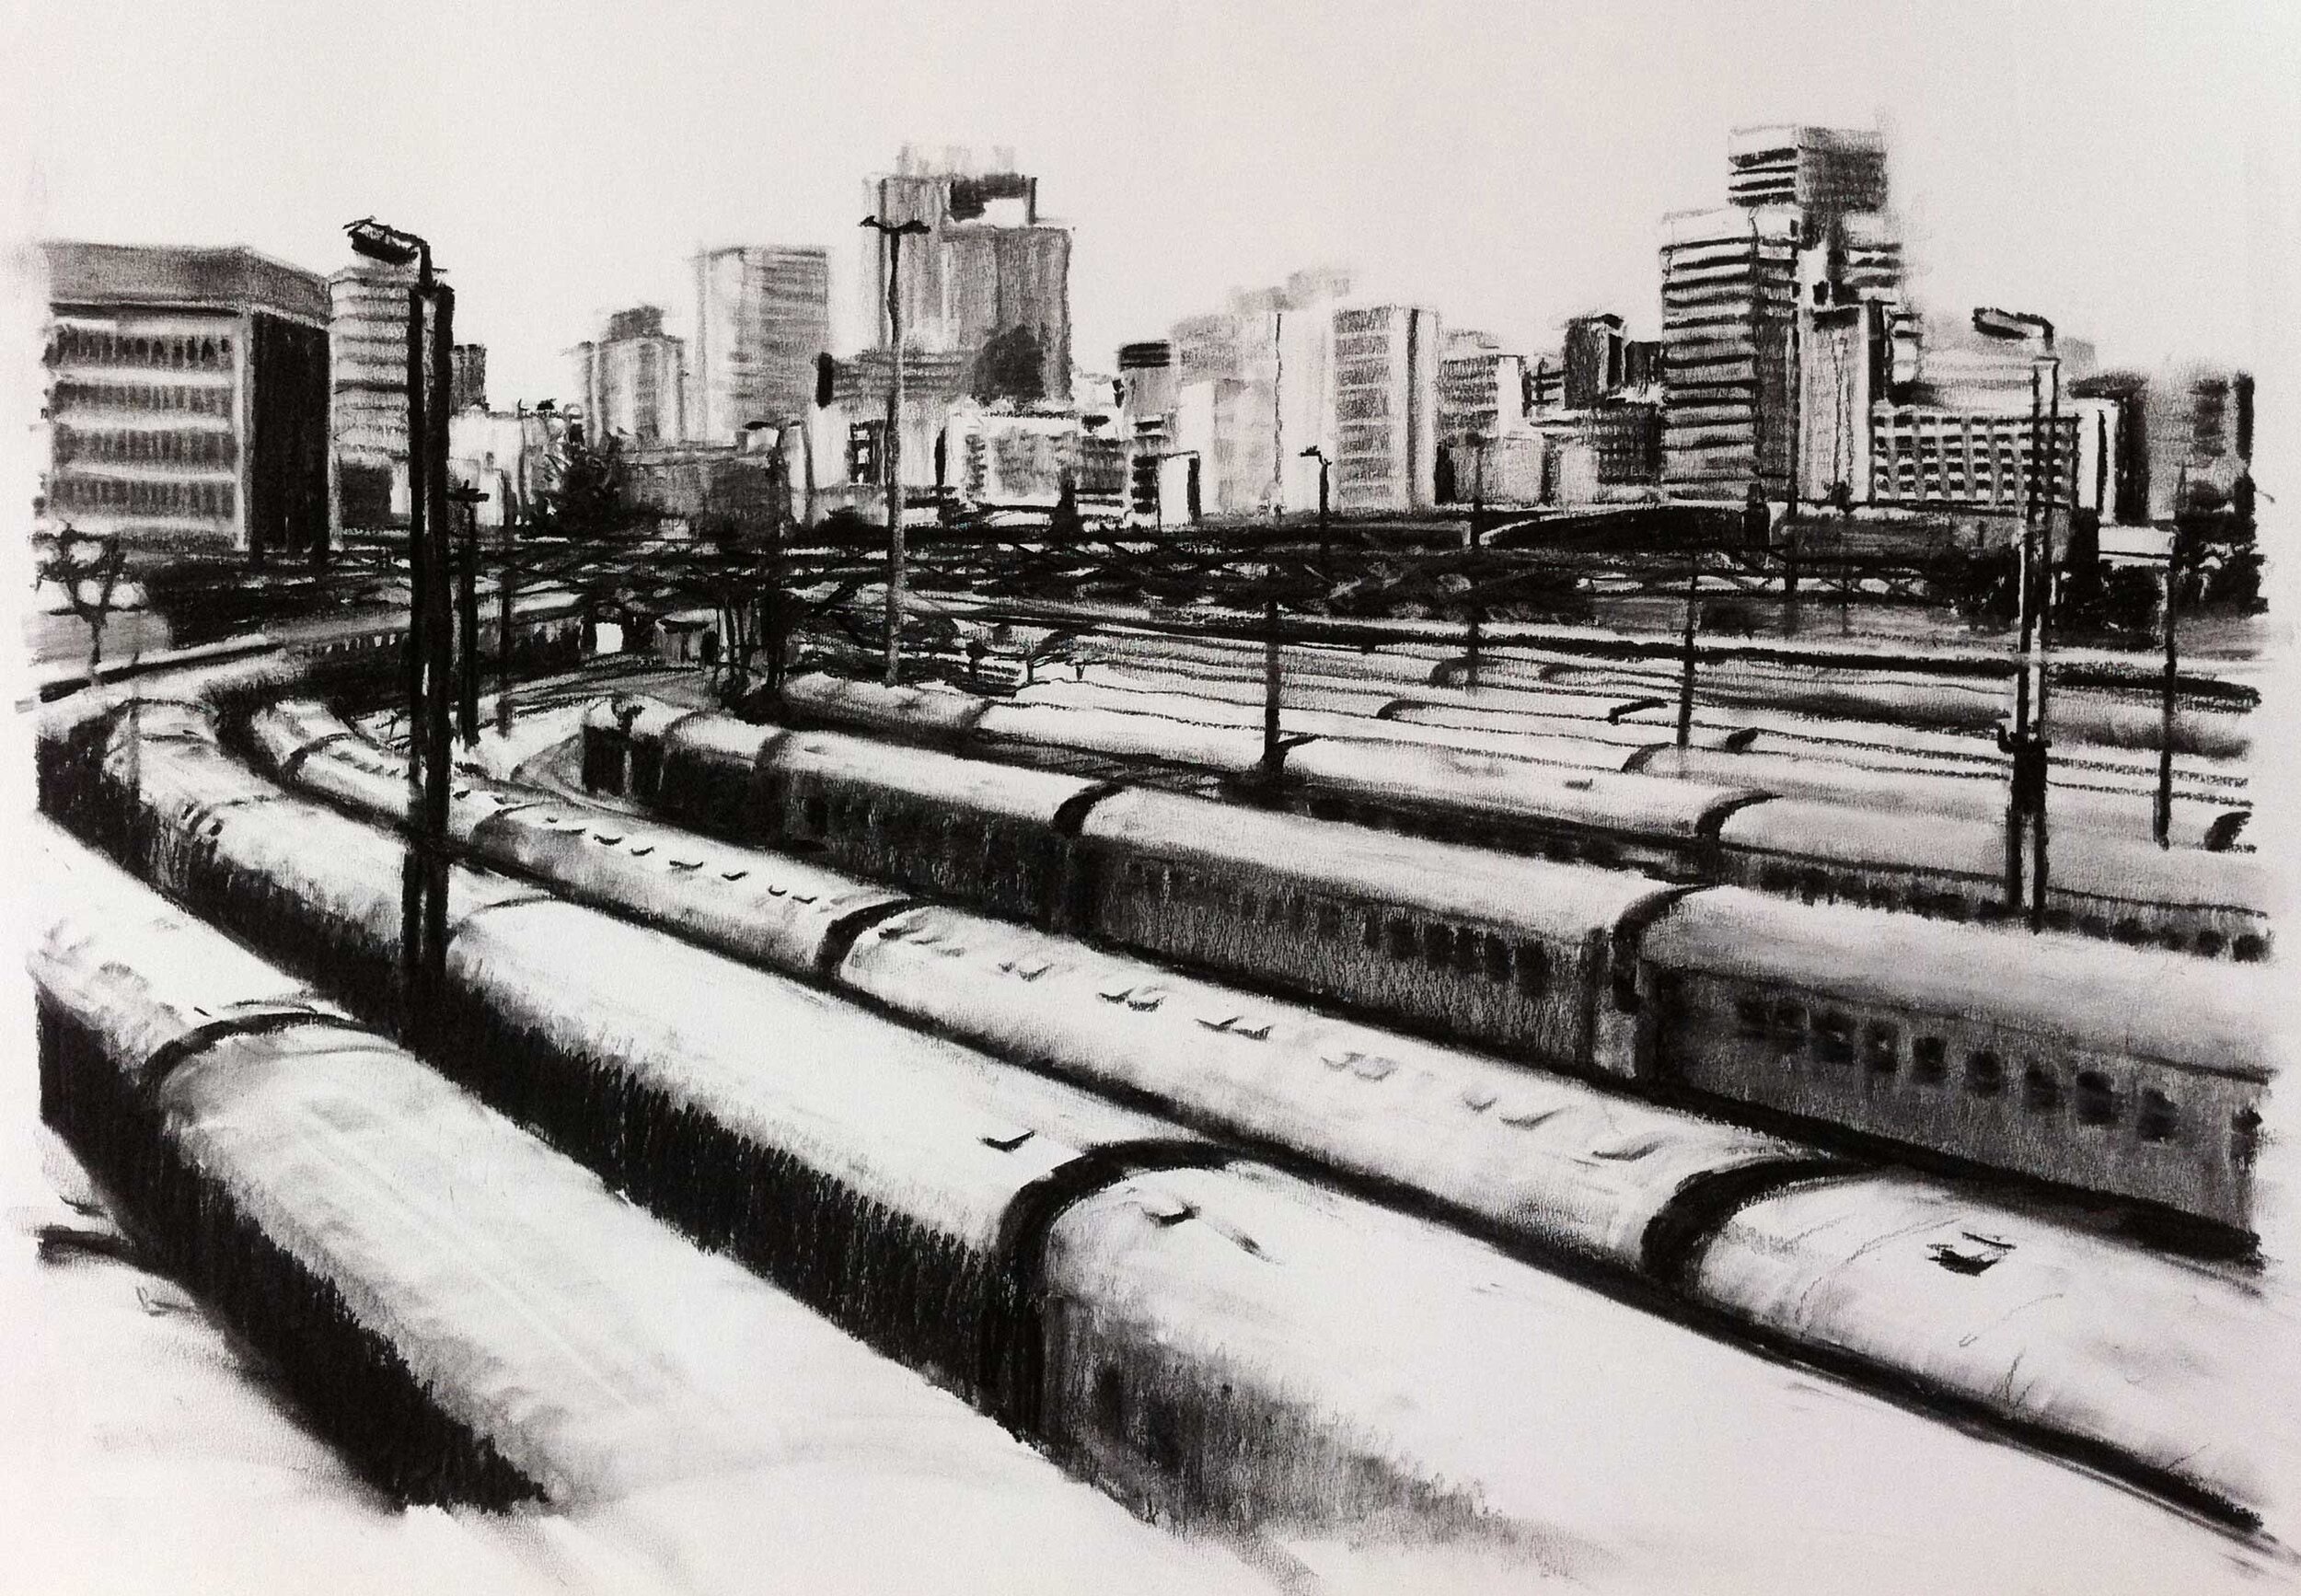  'City Suction i'. 2011. Charcoal on paper. 60cm x 42cm.  